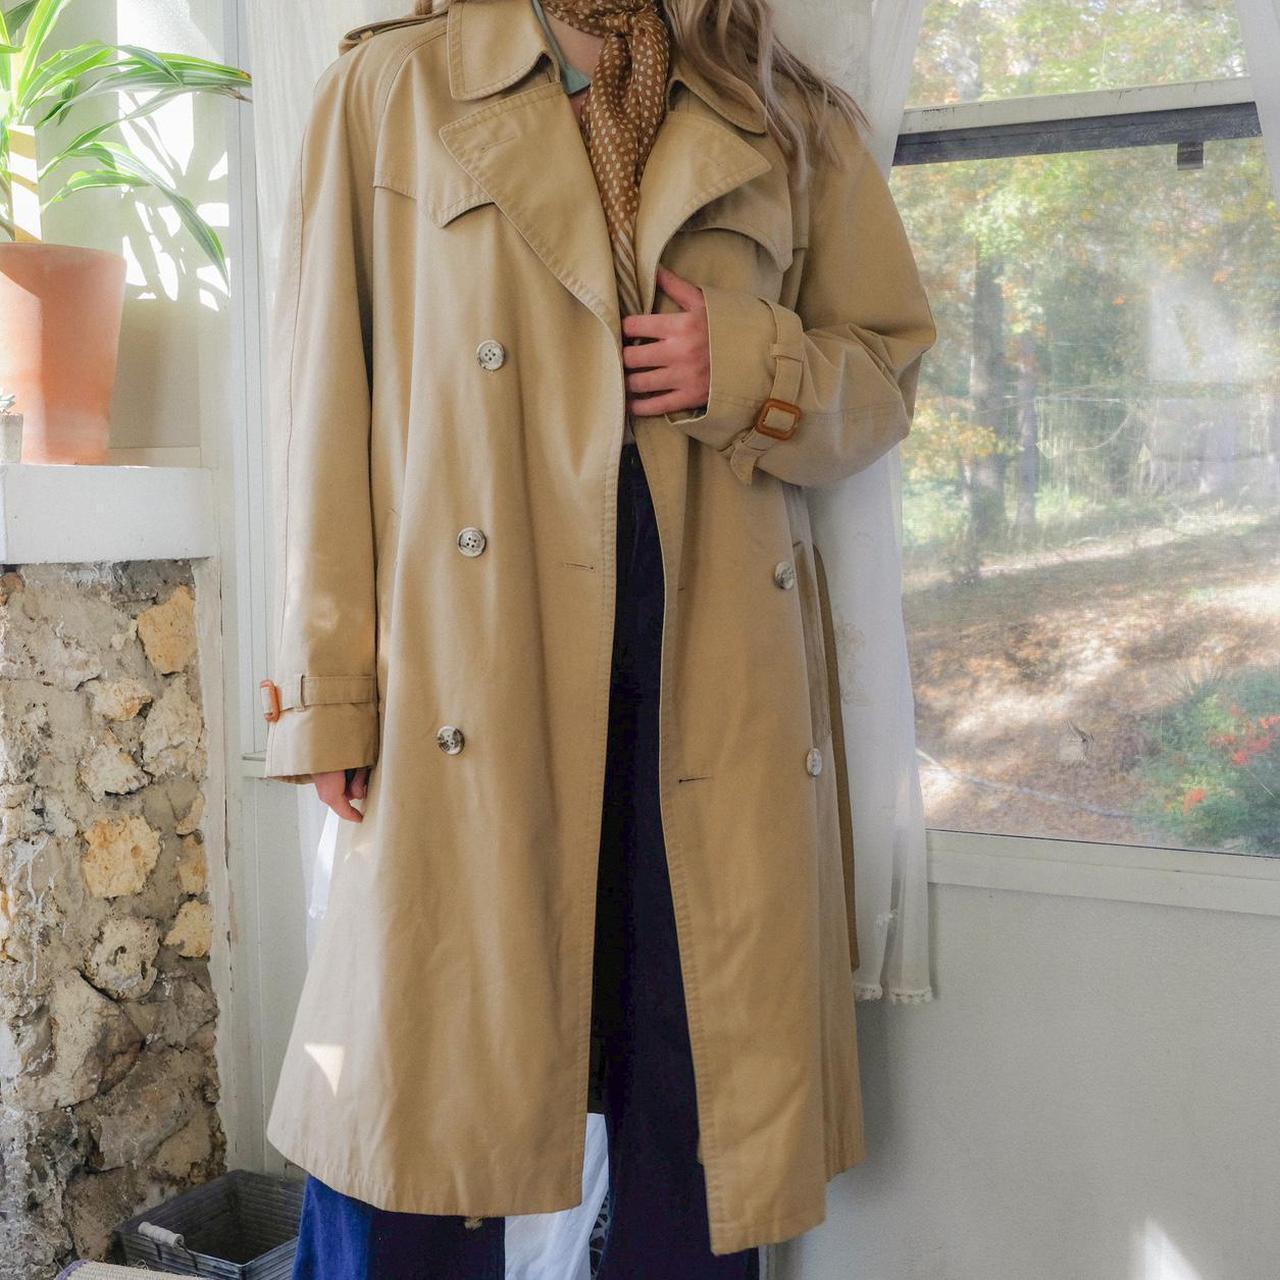 Product Image 3 - Vintage tan trench coat. Feels